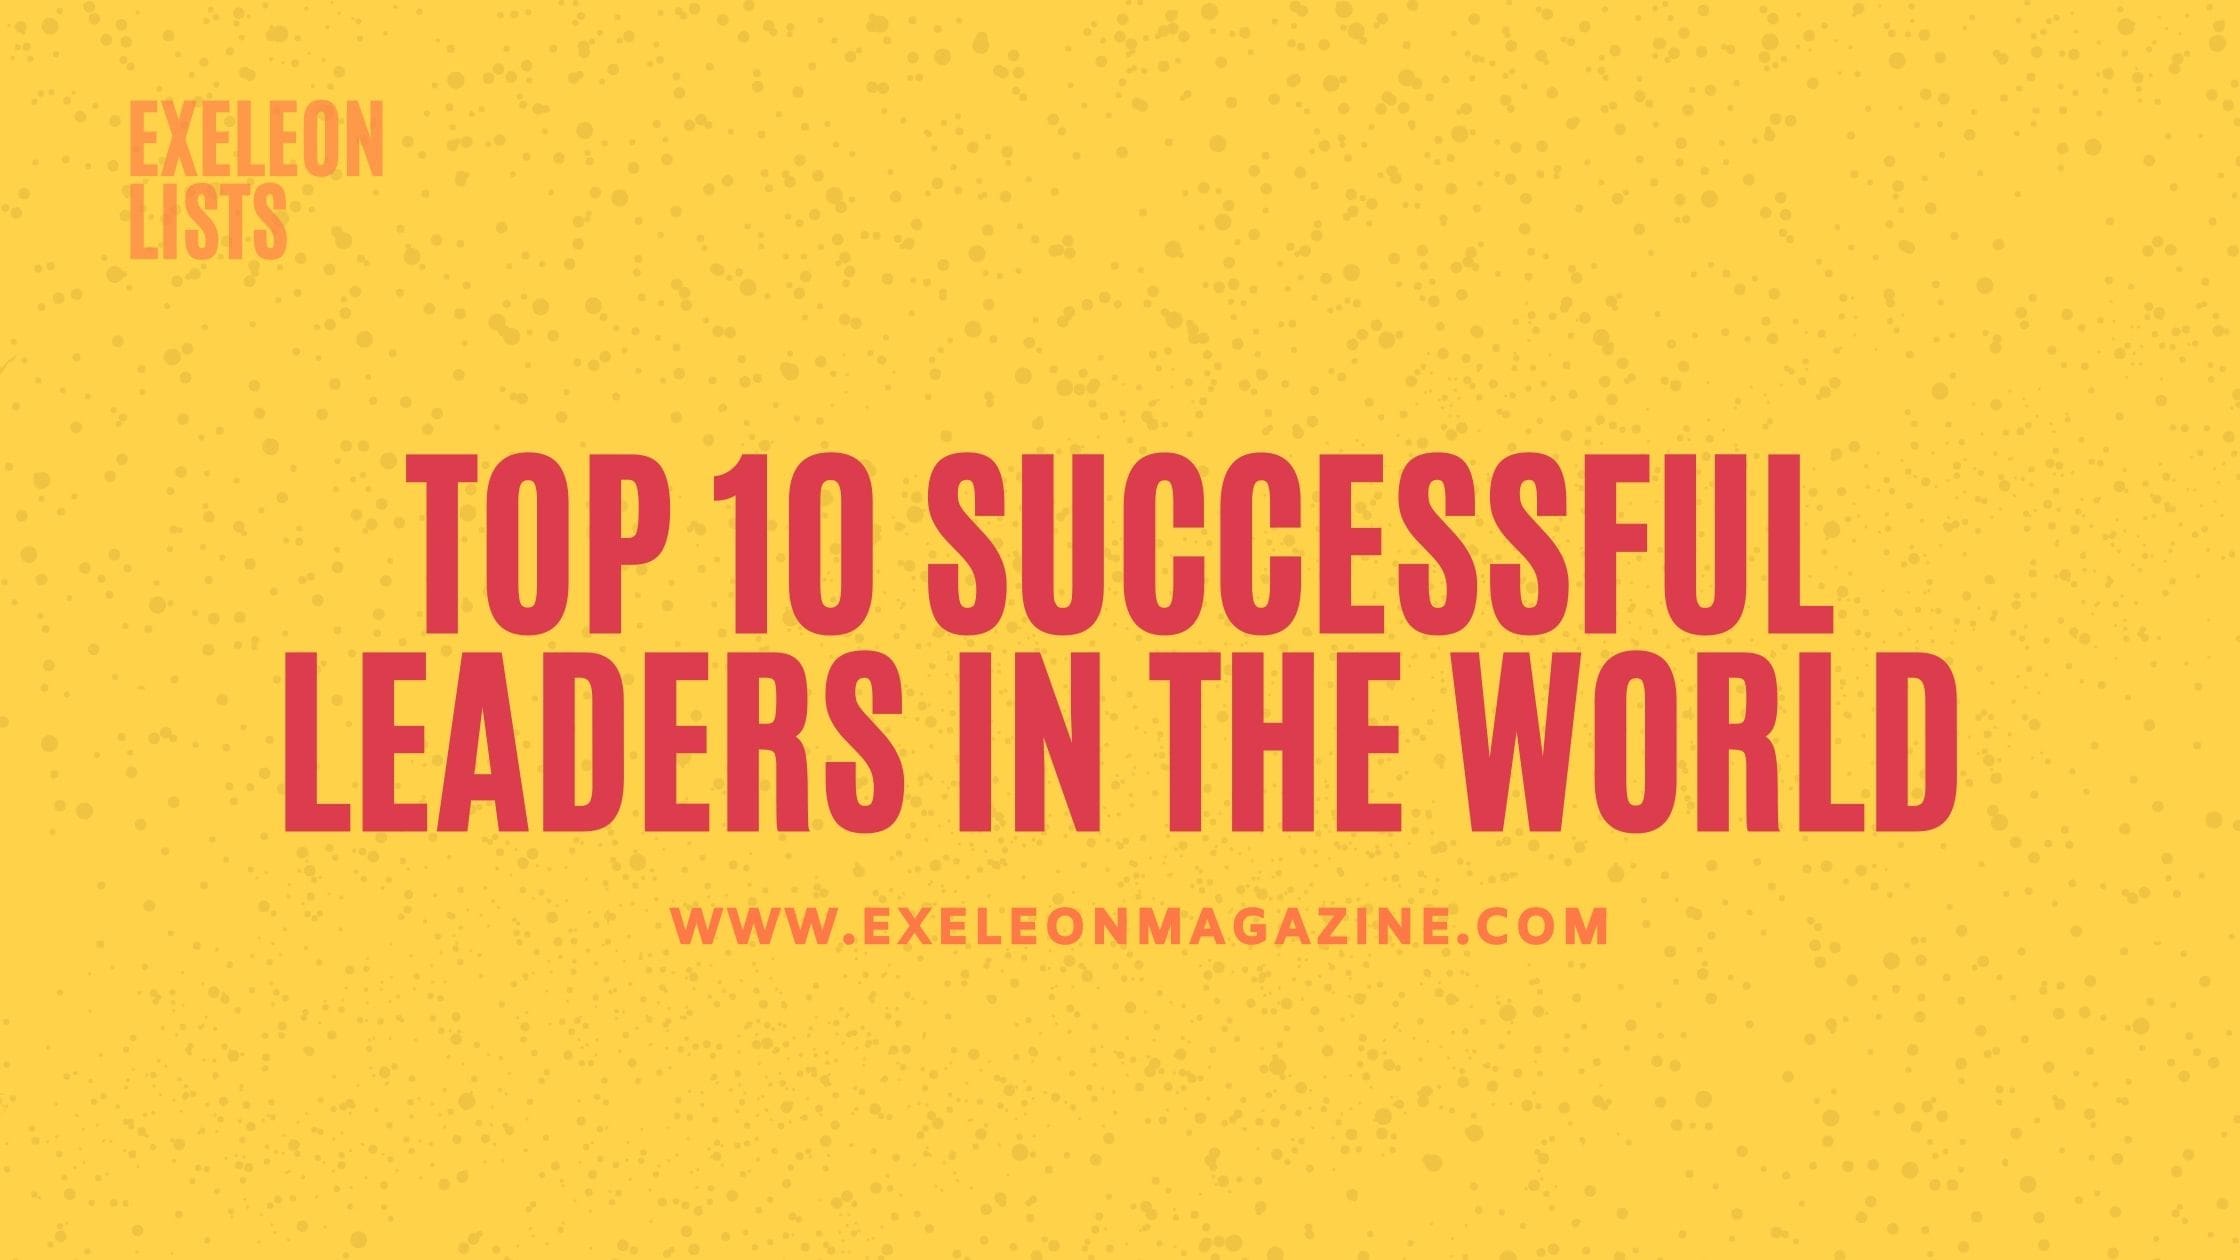 Ranking the Top 10 Successful Leaders in the World